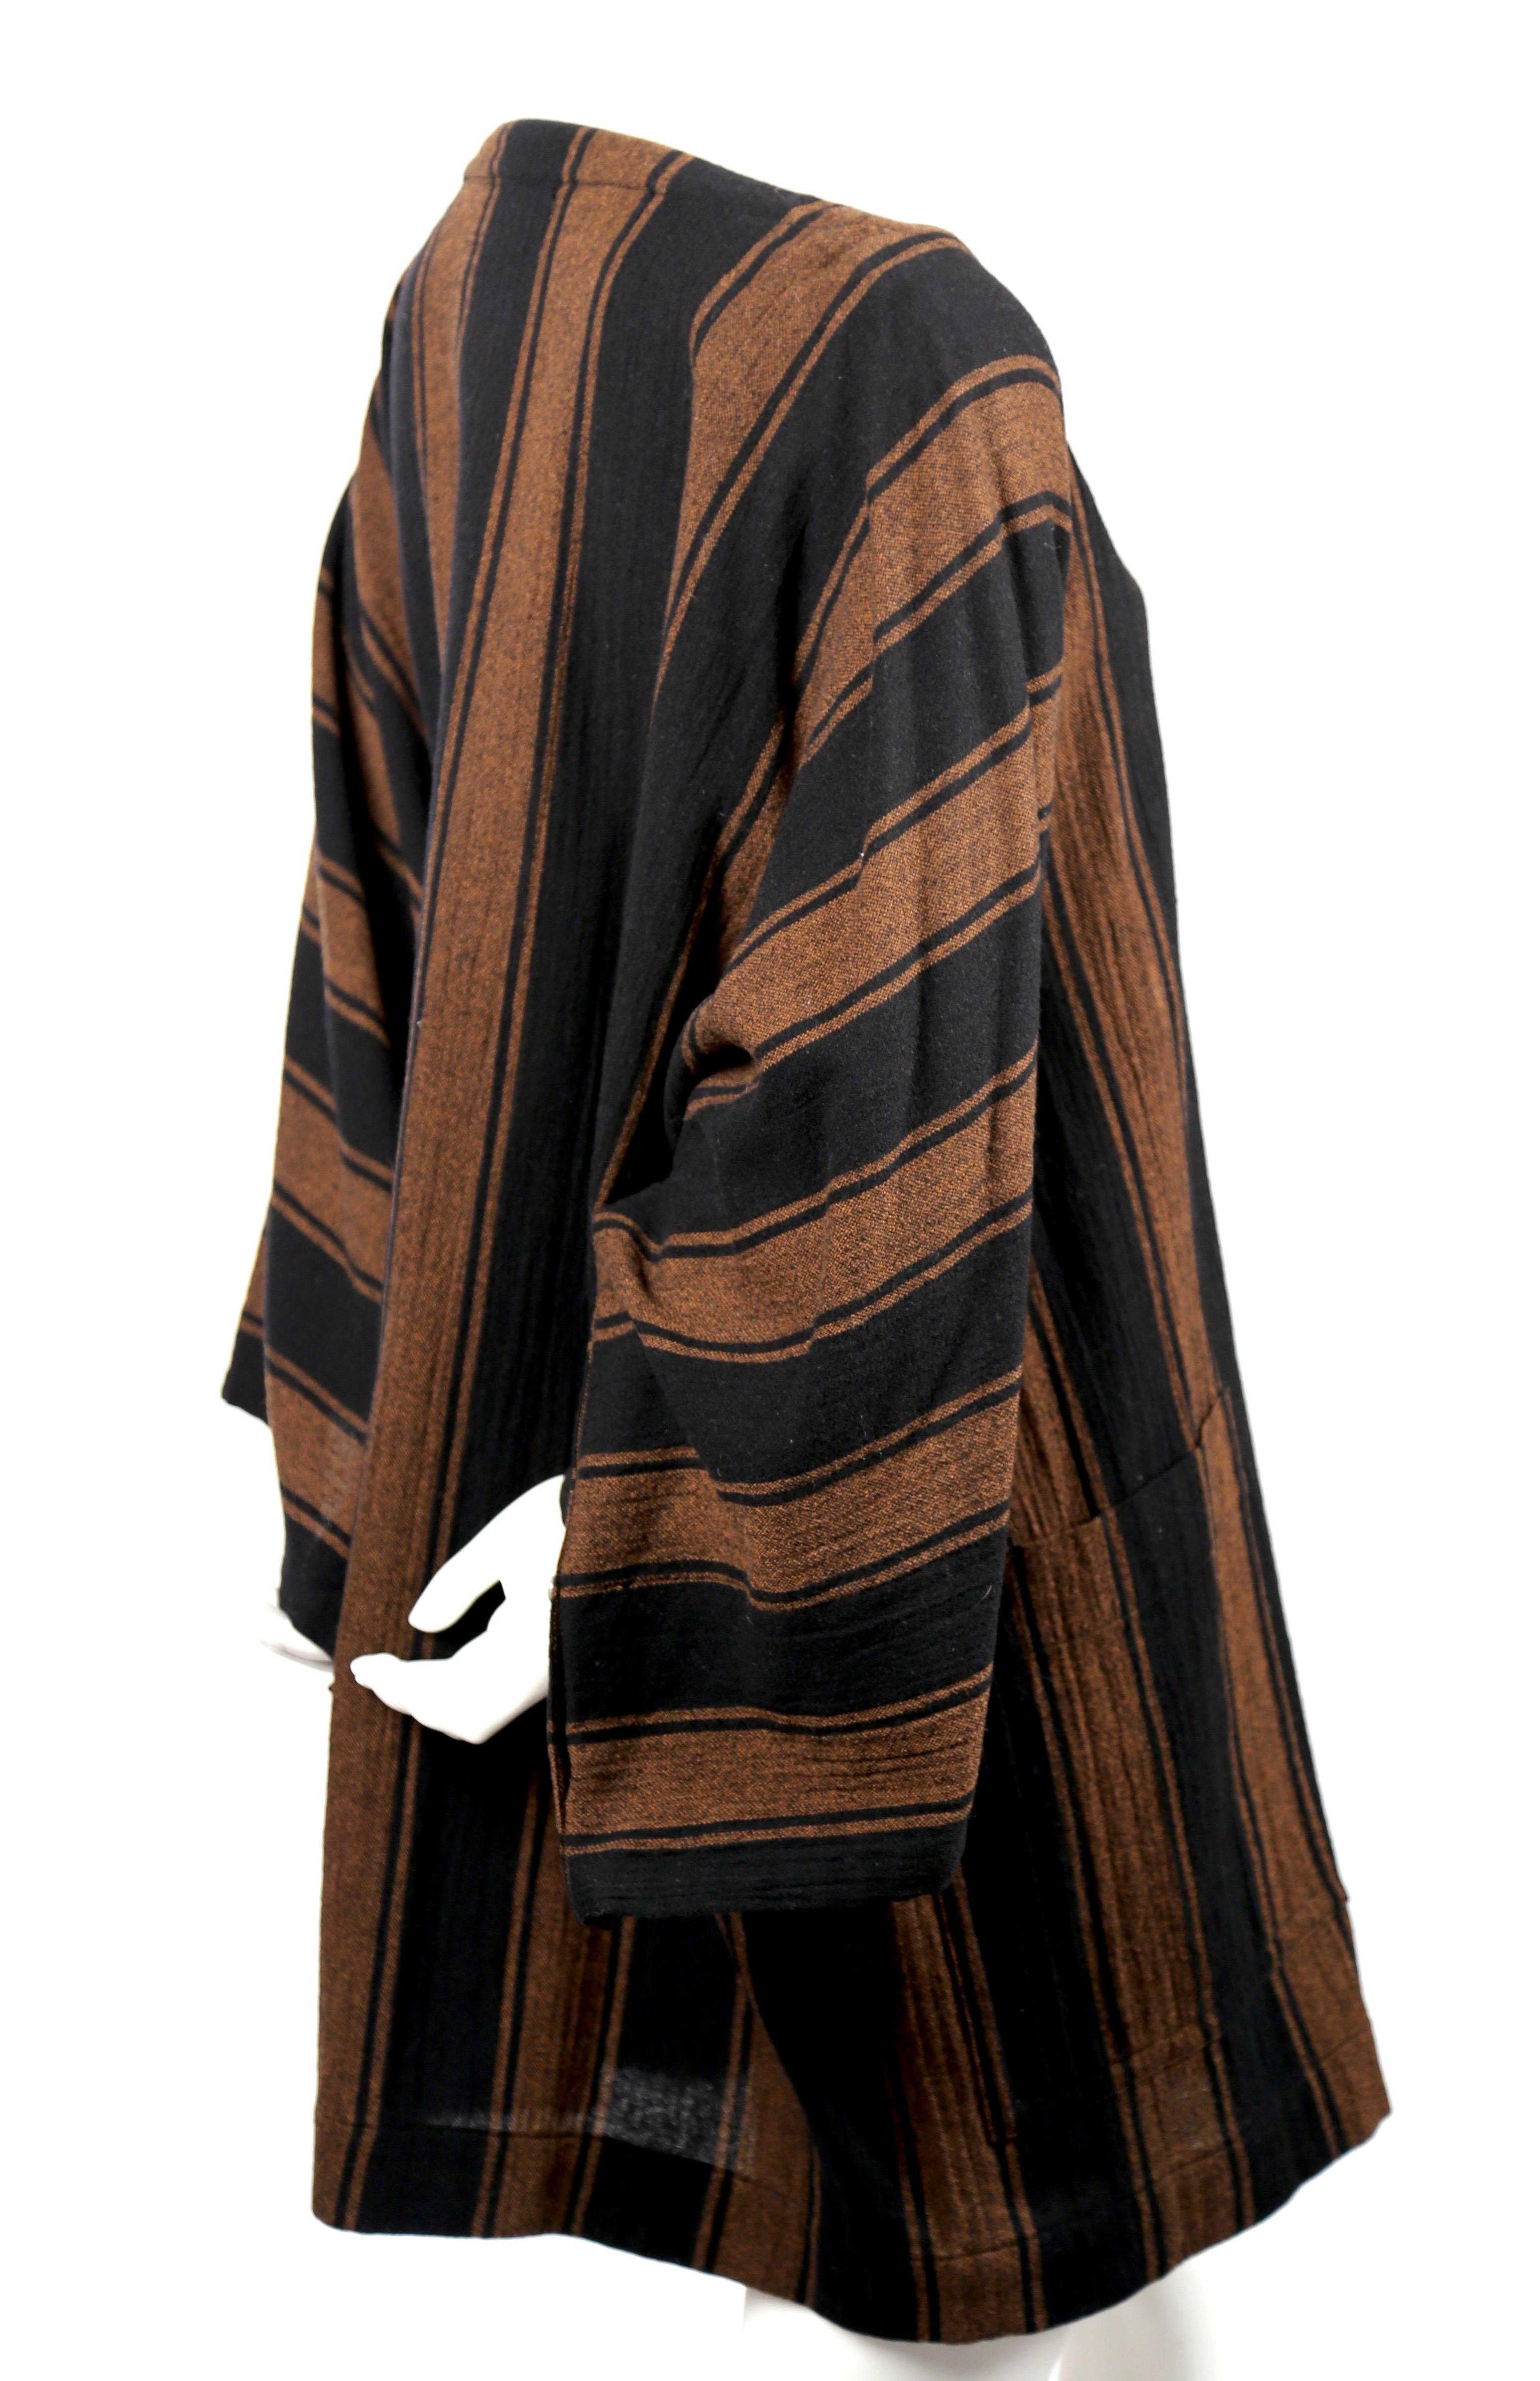 Black and rust striped wool tunic dress with wrap around patch pockets and interesting button detail on undersides of arms designed by Issey Miyake for his 'Plantation' line dating to the 1980's.  Labeled a Japanese size S however due to the